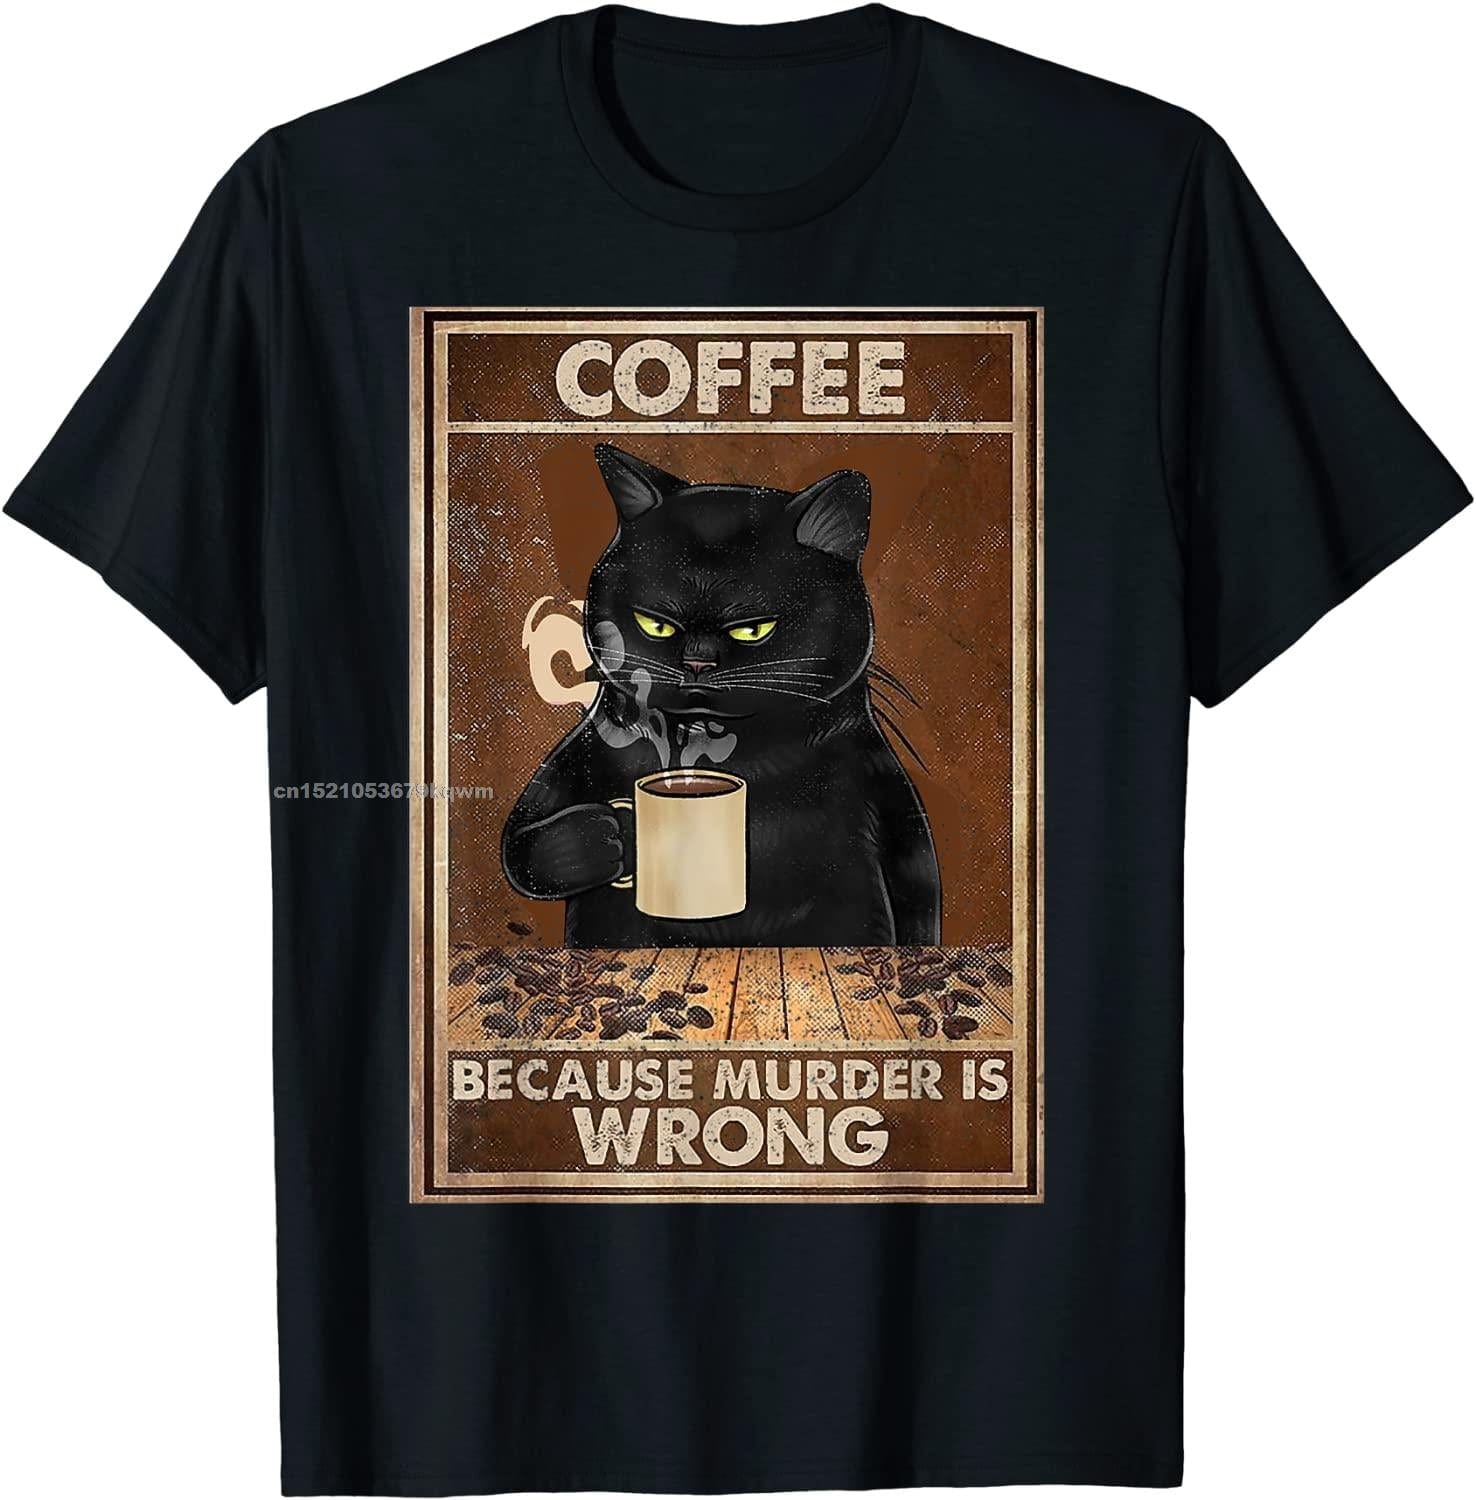 "Black Cat and Coffee" t-shirt for cat and coffee lovers